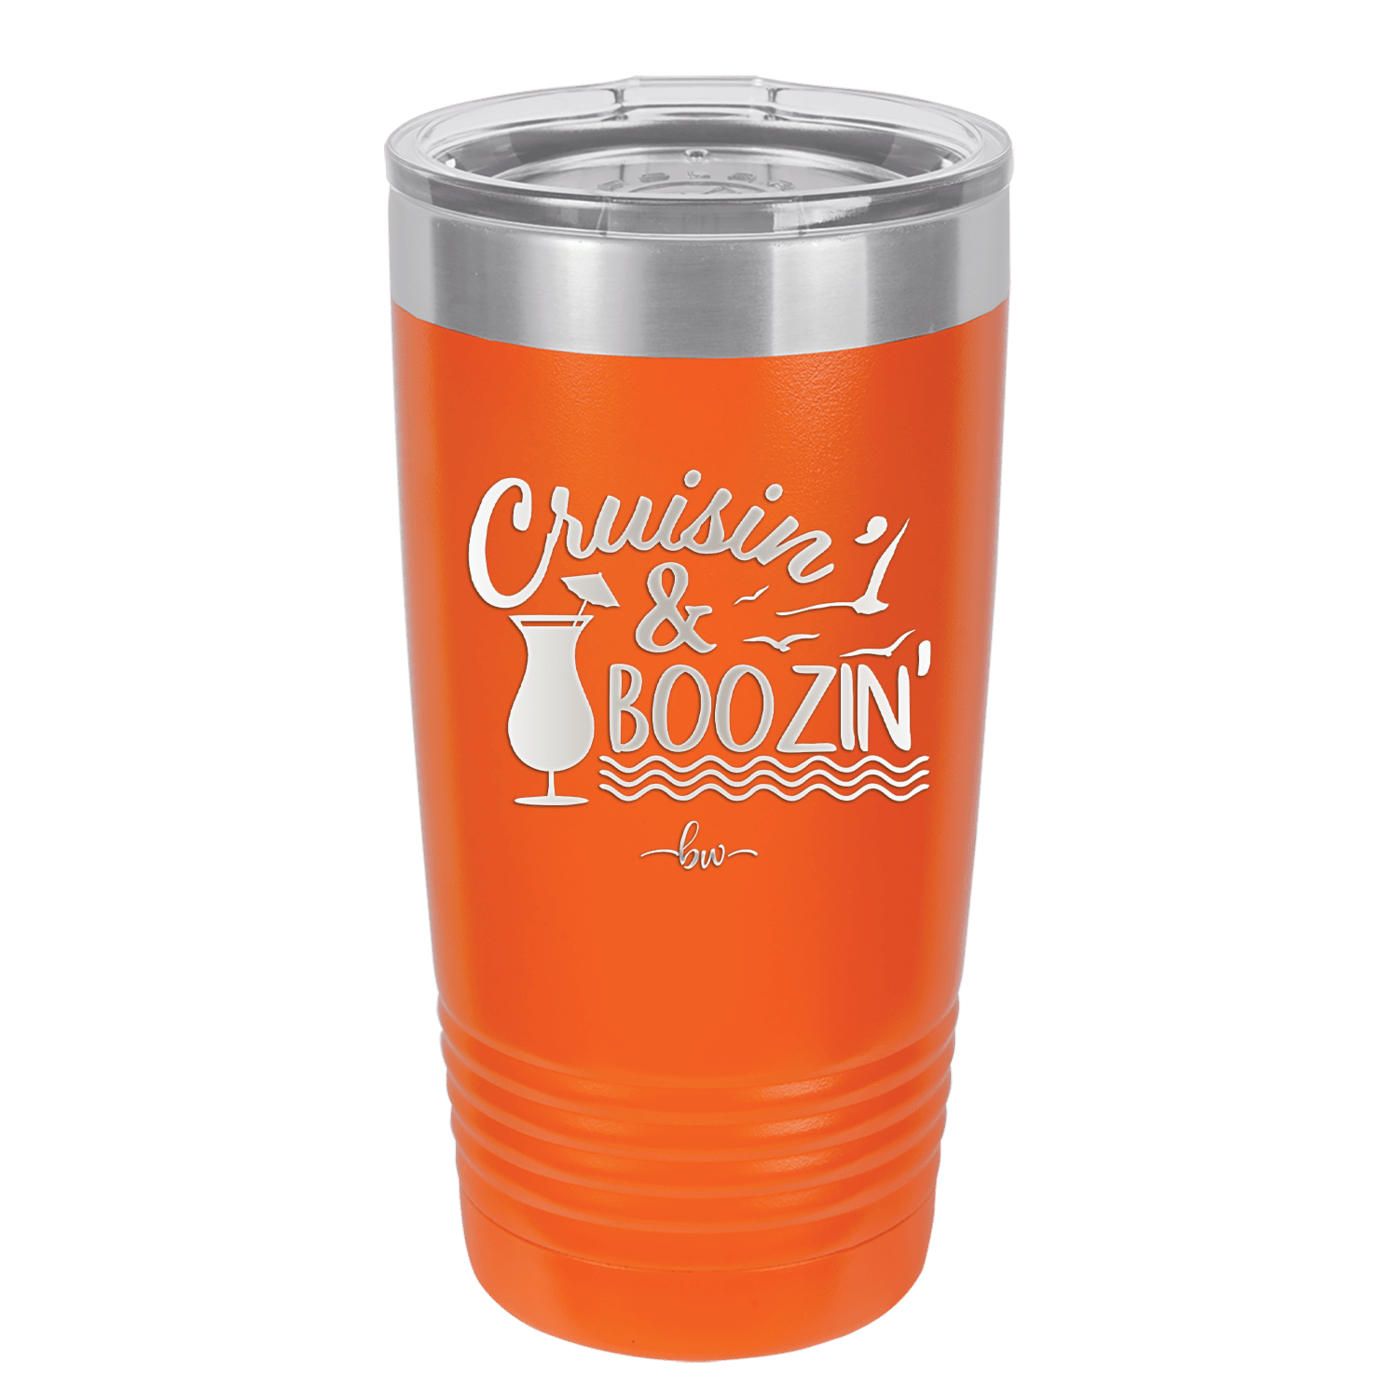 Cruisin and Boozin Cruise 3 - Laser Engraved Stainless Steel Drinkware - 1468 -